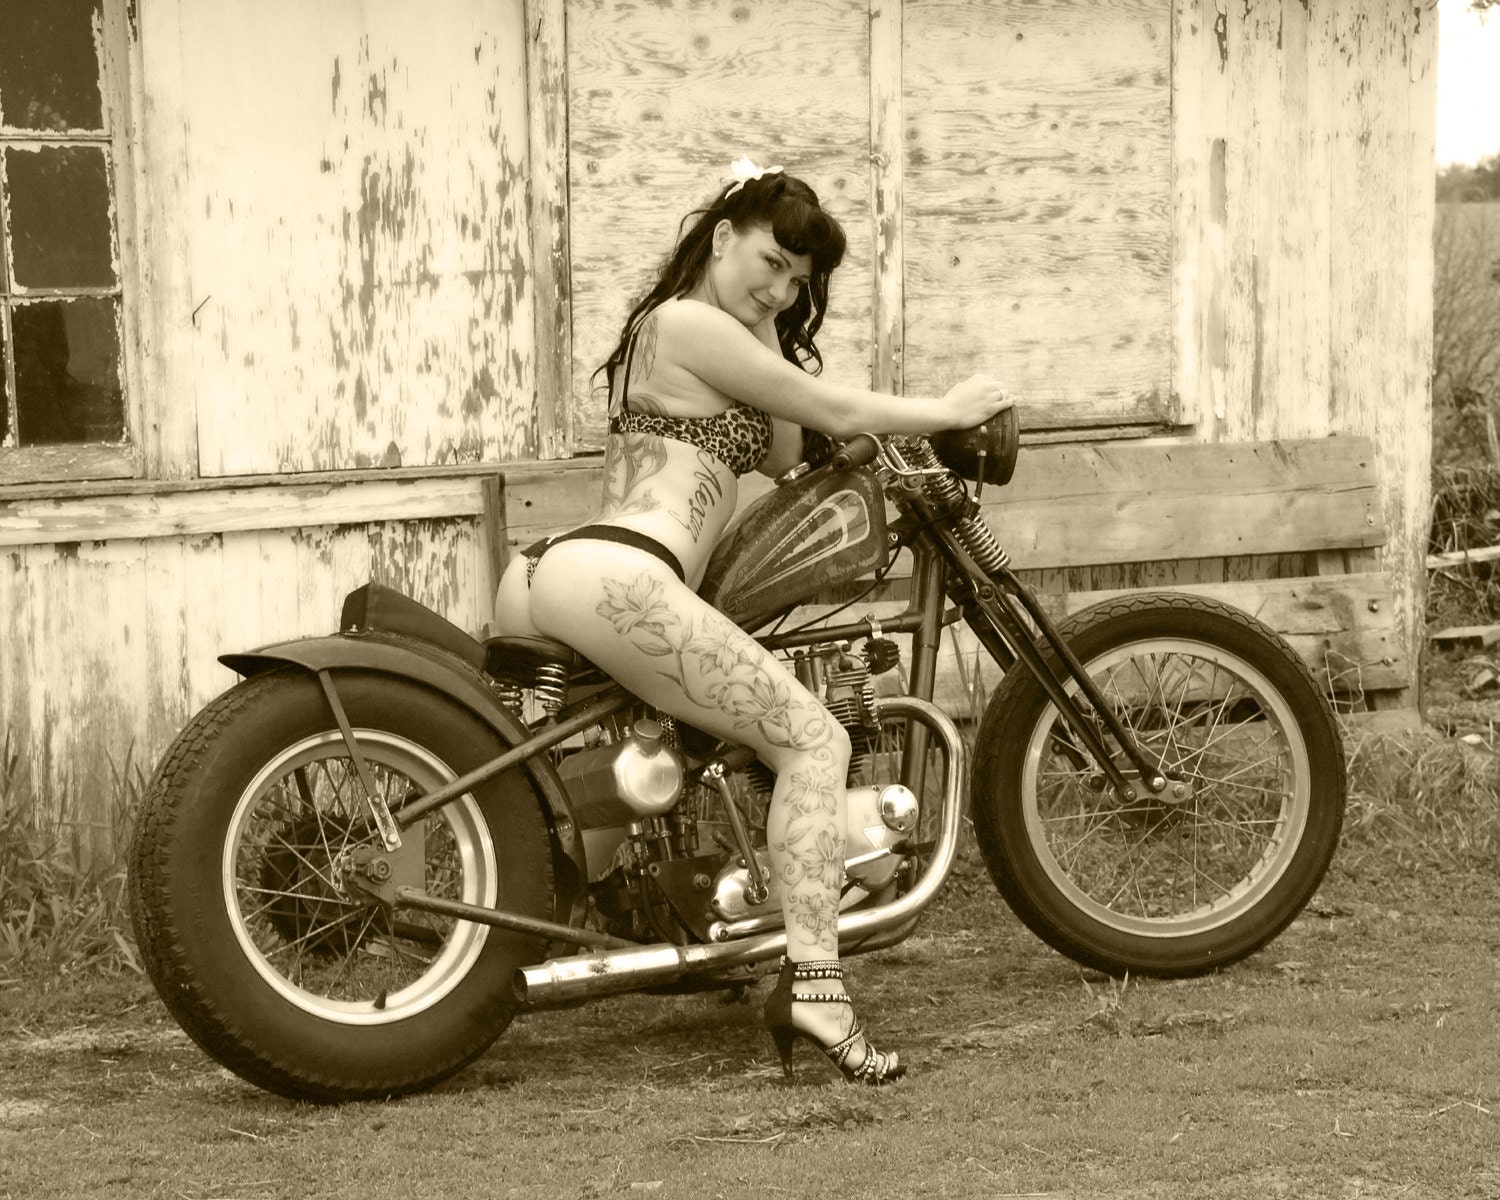 8x10 inch photo of a tattooed babe on a Triumph bobber motorcycle